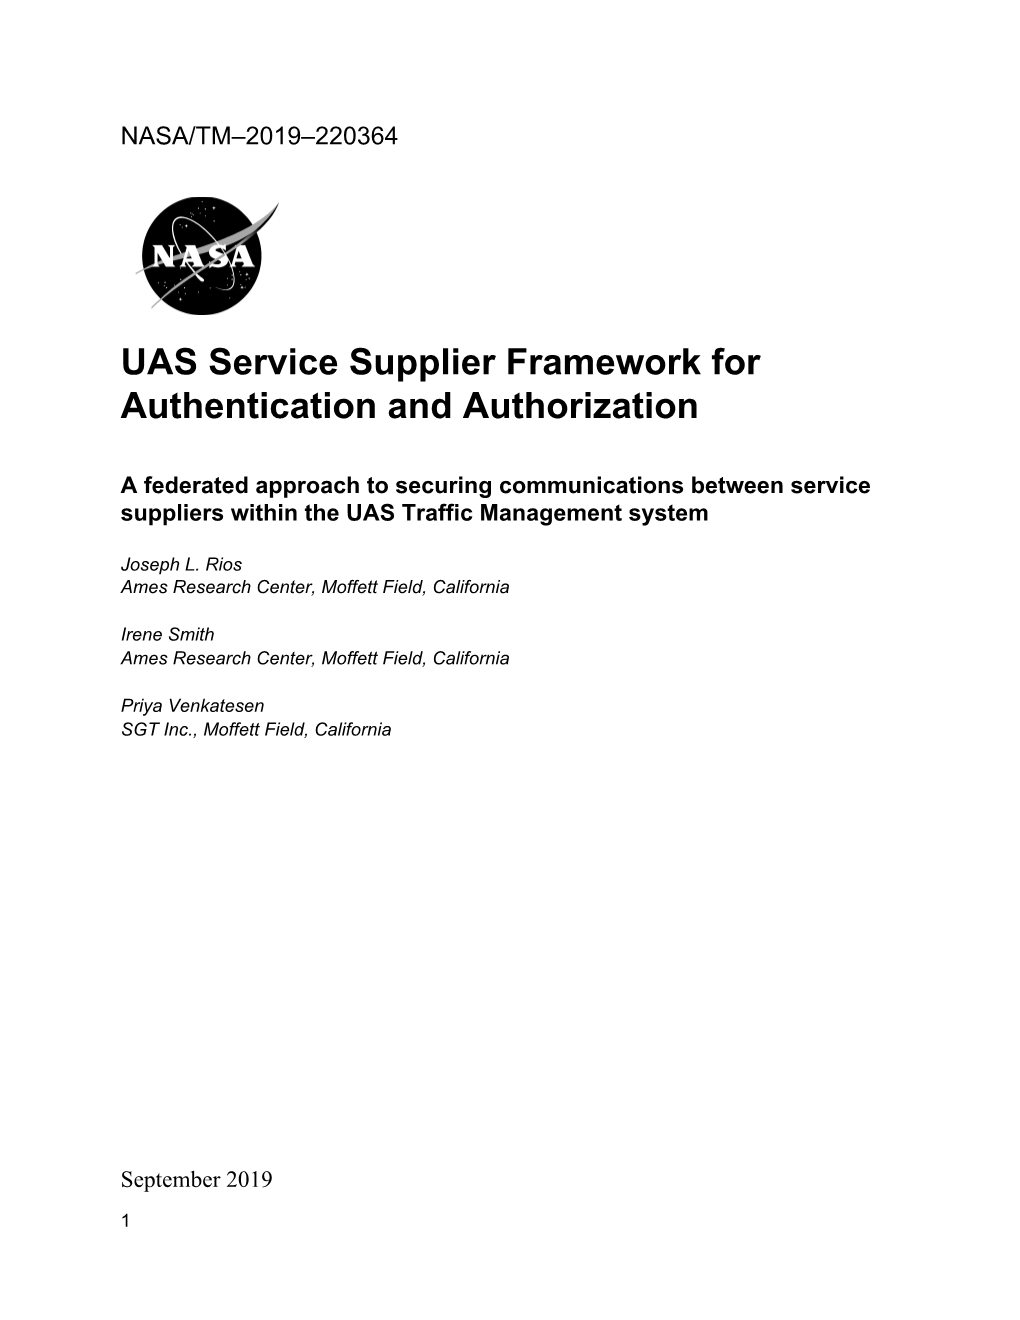 UAS Service Supplier Framework for Authentication and Authorization